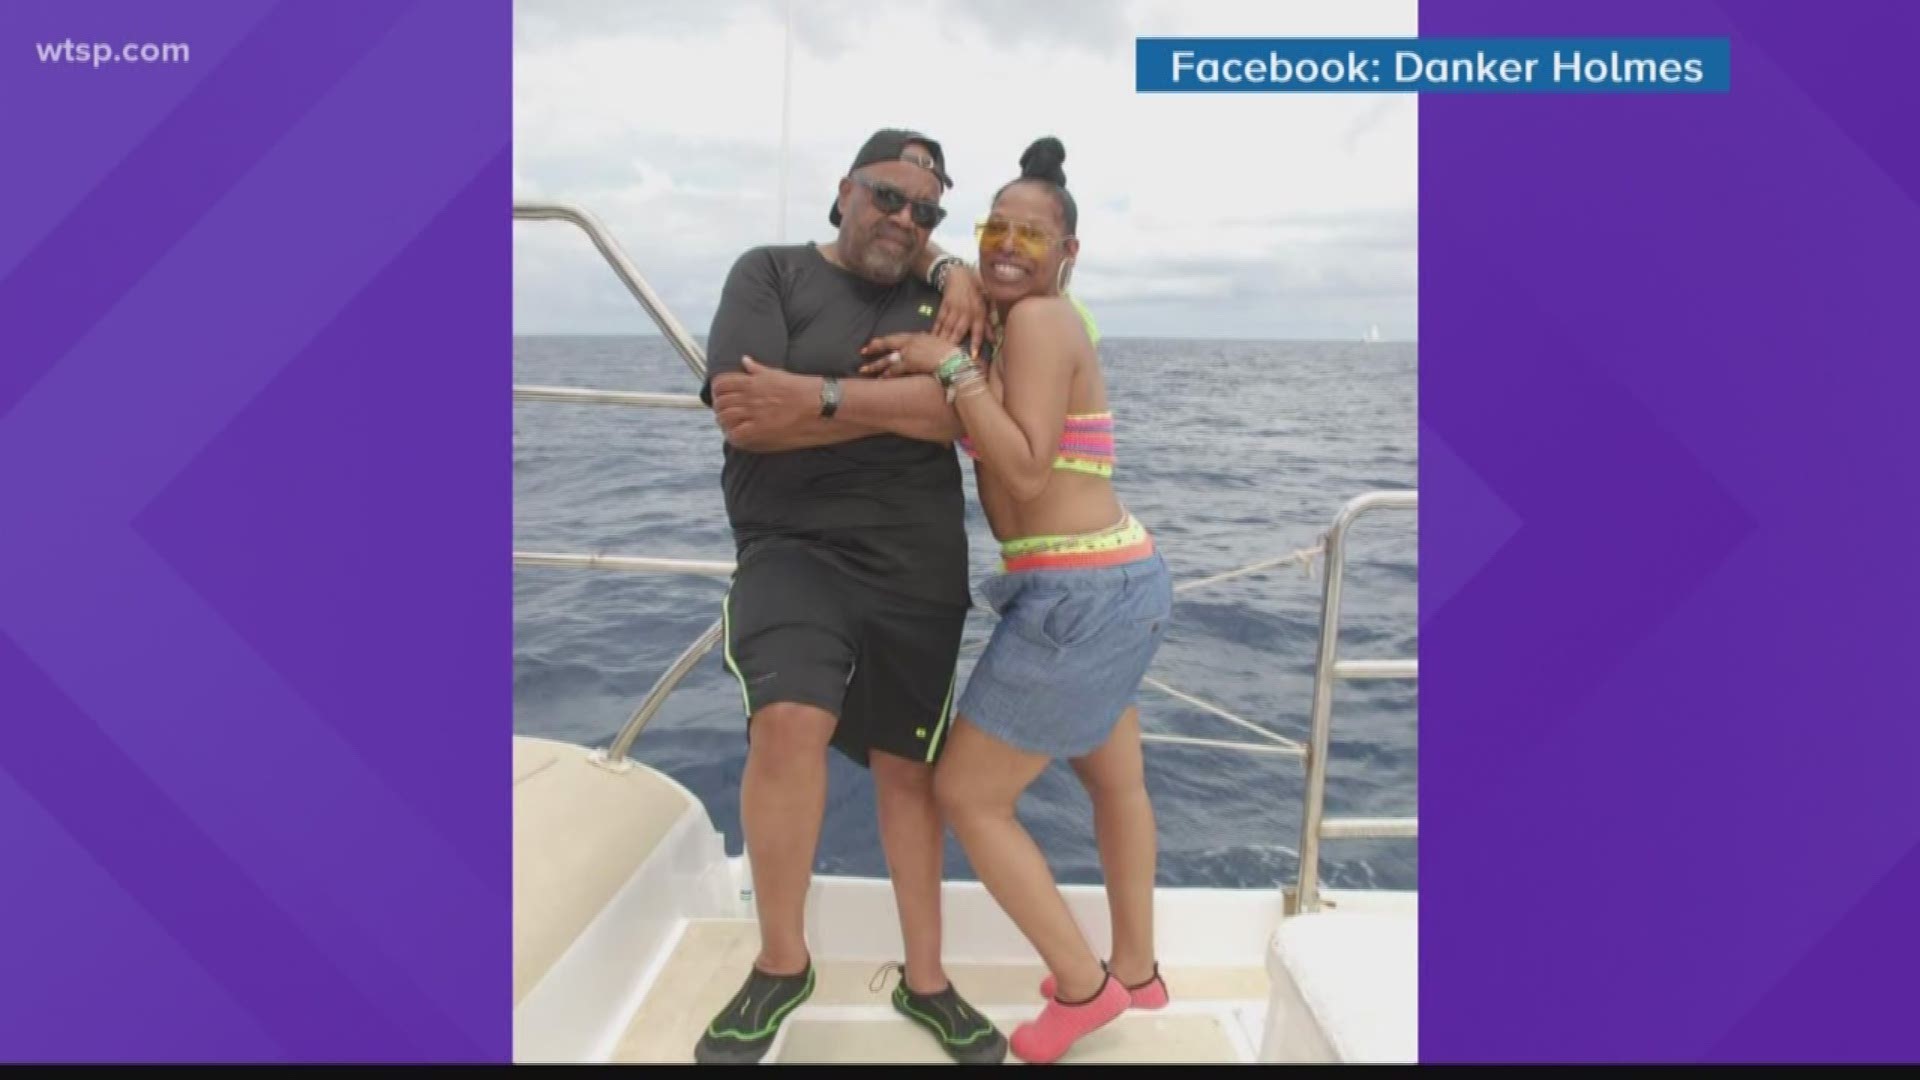 Since May 25, Edward Nathaniel Homes, 63, and Cynthia Ann Day, 49, had been staying at the Bahía Príncipe hotel located at the resort Playa Nueva Romana, USA Today reports.